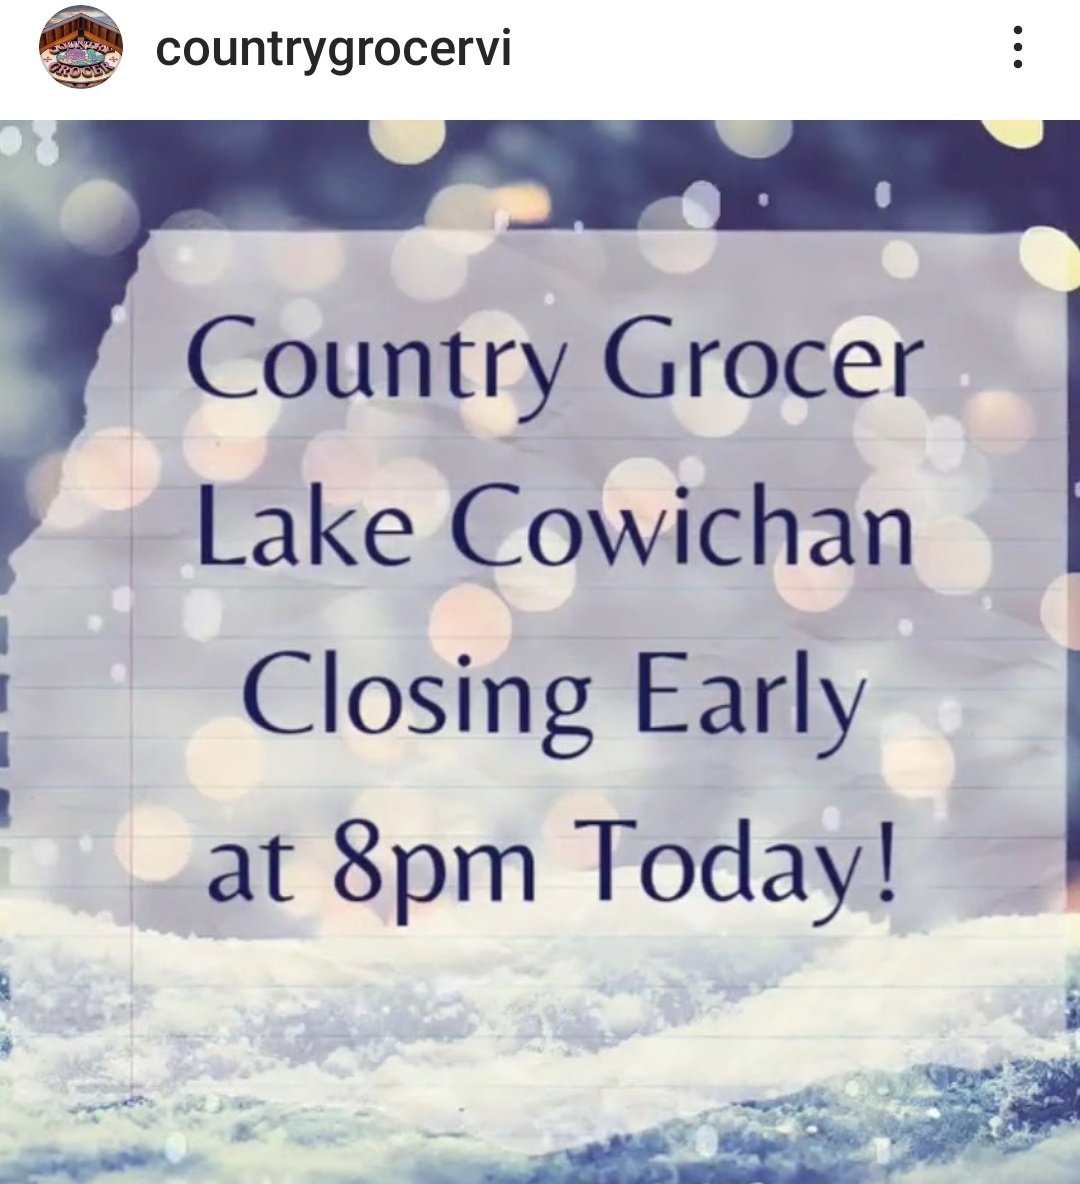 Both Country Grocer Cobble Hill and Lake Cowichan will close at 6pm and 8pm.
#cobblehill #lakecowichan